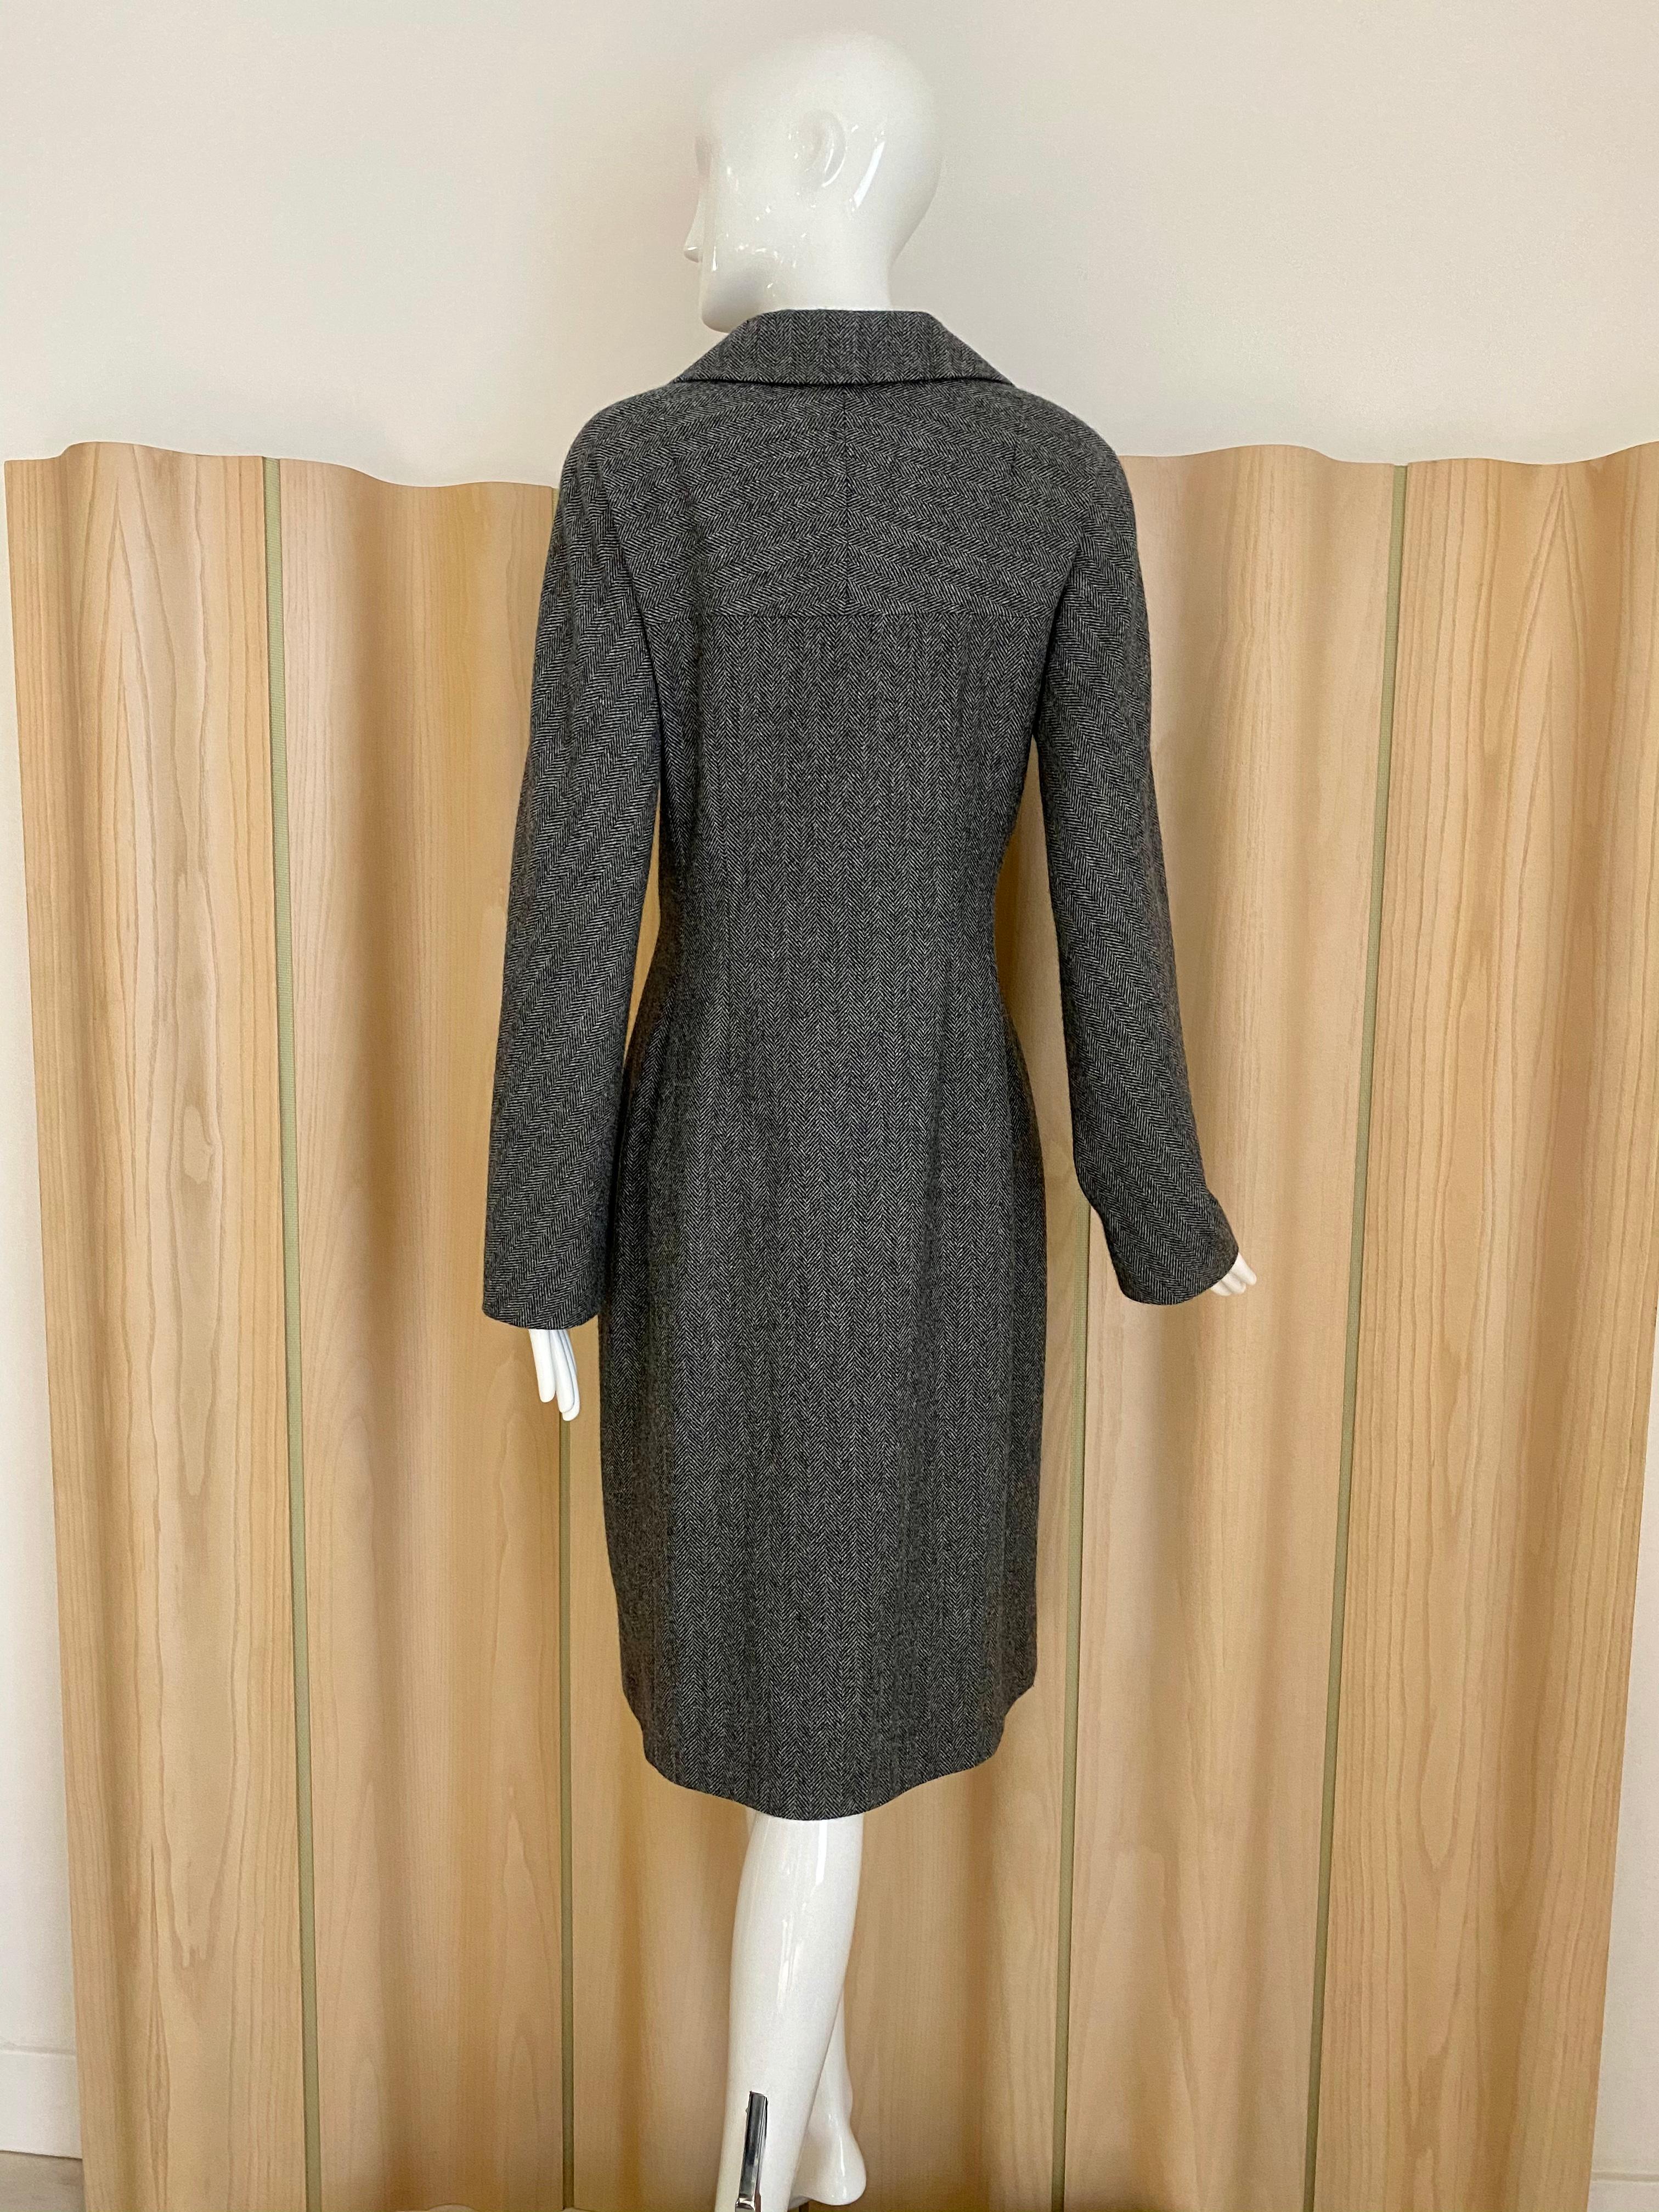 Dolce Gabbana Herringbone Wool Coat In Excellent Condition For Sale In Beverly Hills, CA